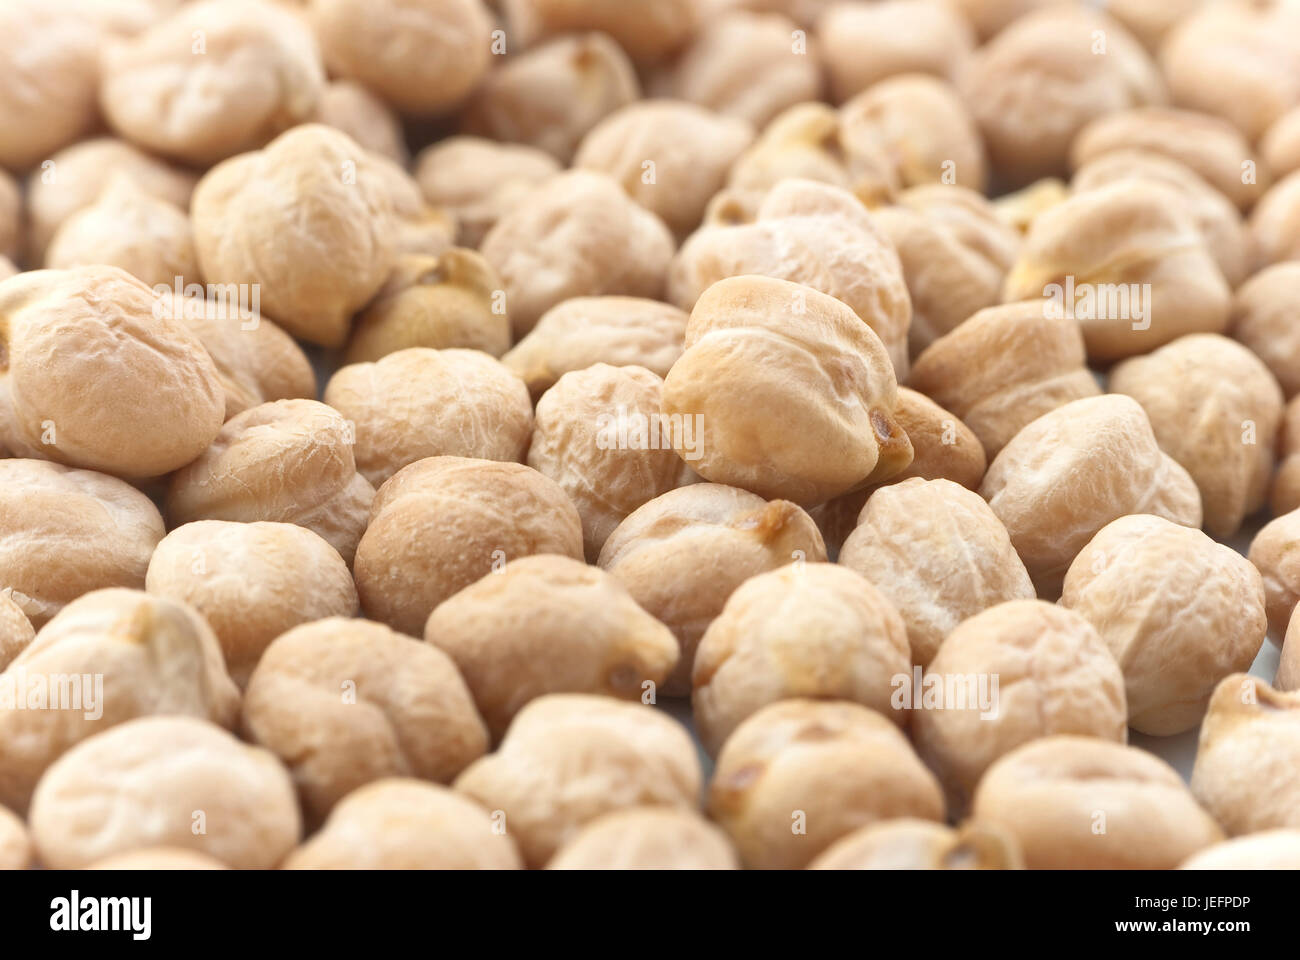 Close-up (macro) of chickpeas (garbanzo beans) filling whole frame. Stock Photo